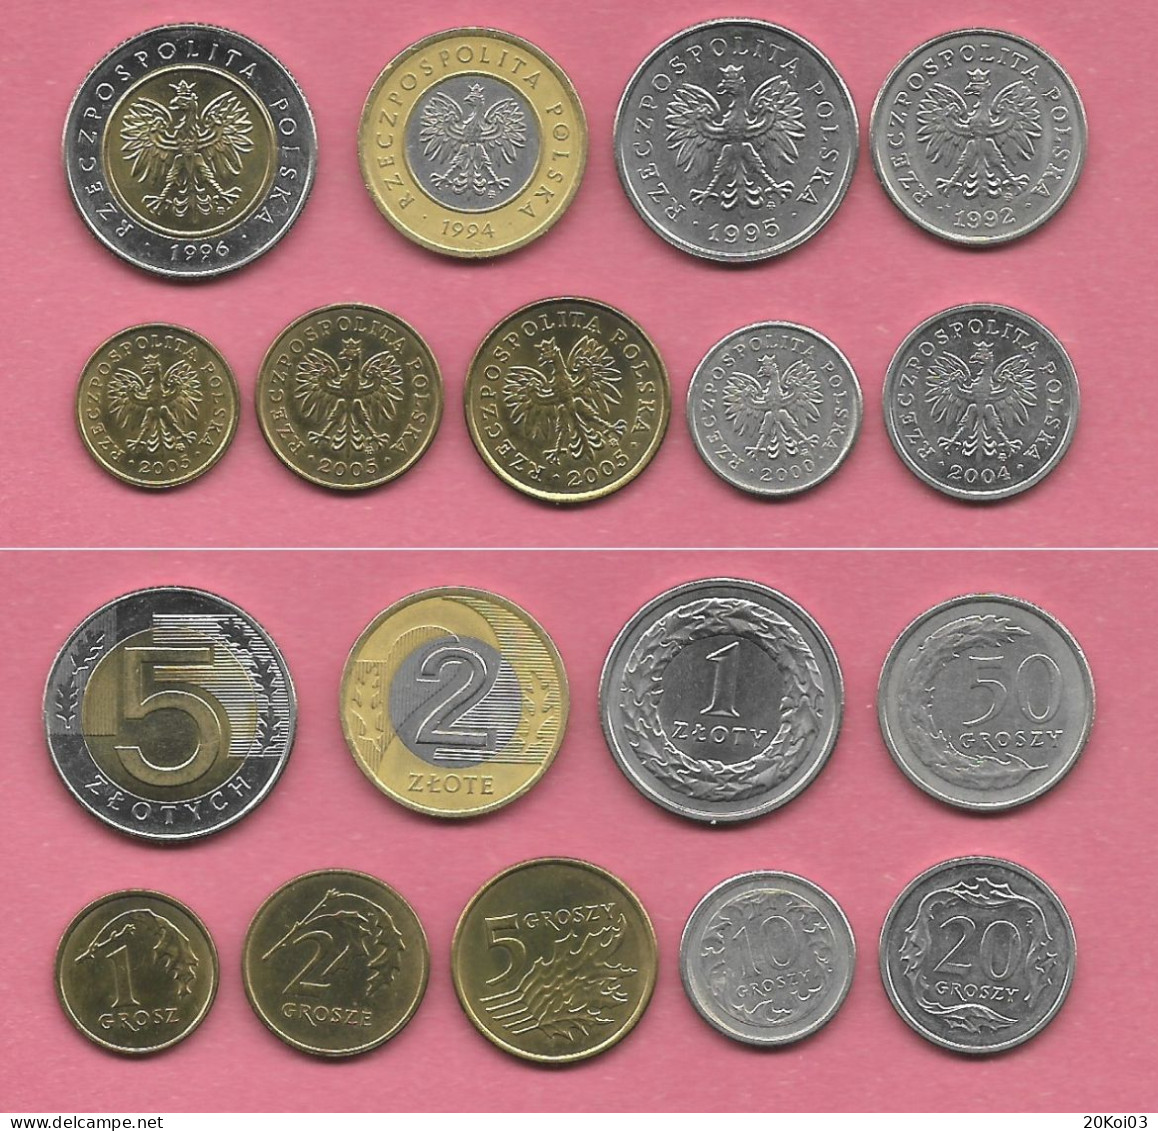 Poland Set Of 9 Coins 1992-2005 (1+2+5+10+20+50 Groszy+1+2+5 Zlotych)_toutes Les Pièces Utilisées, All Coin Used - Pologne